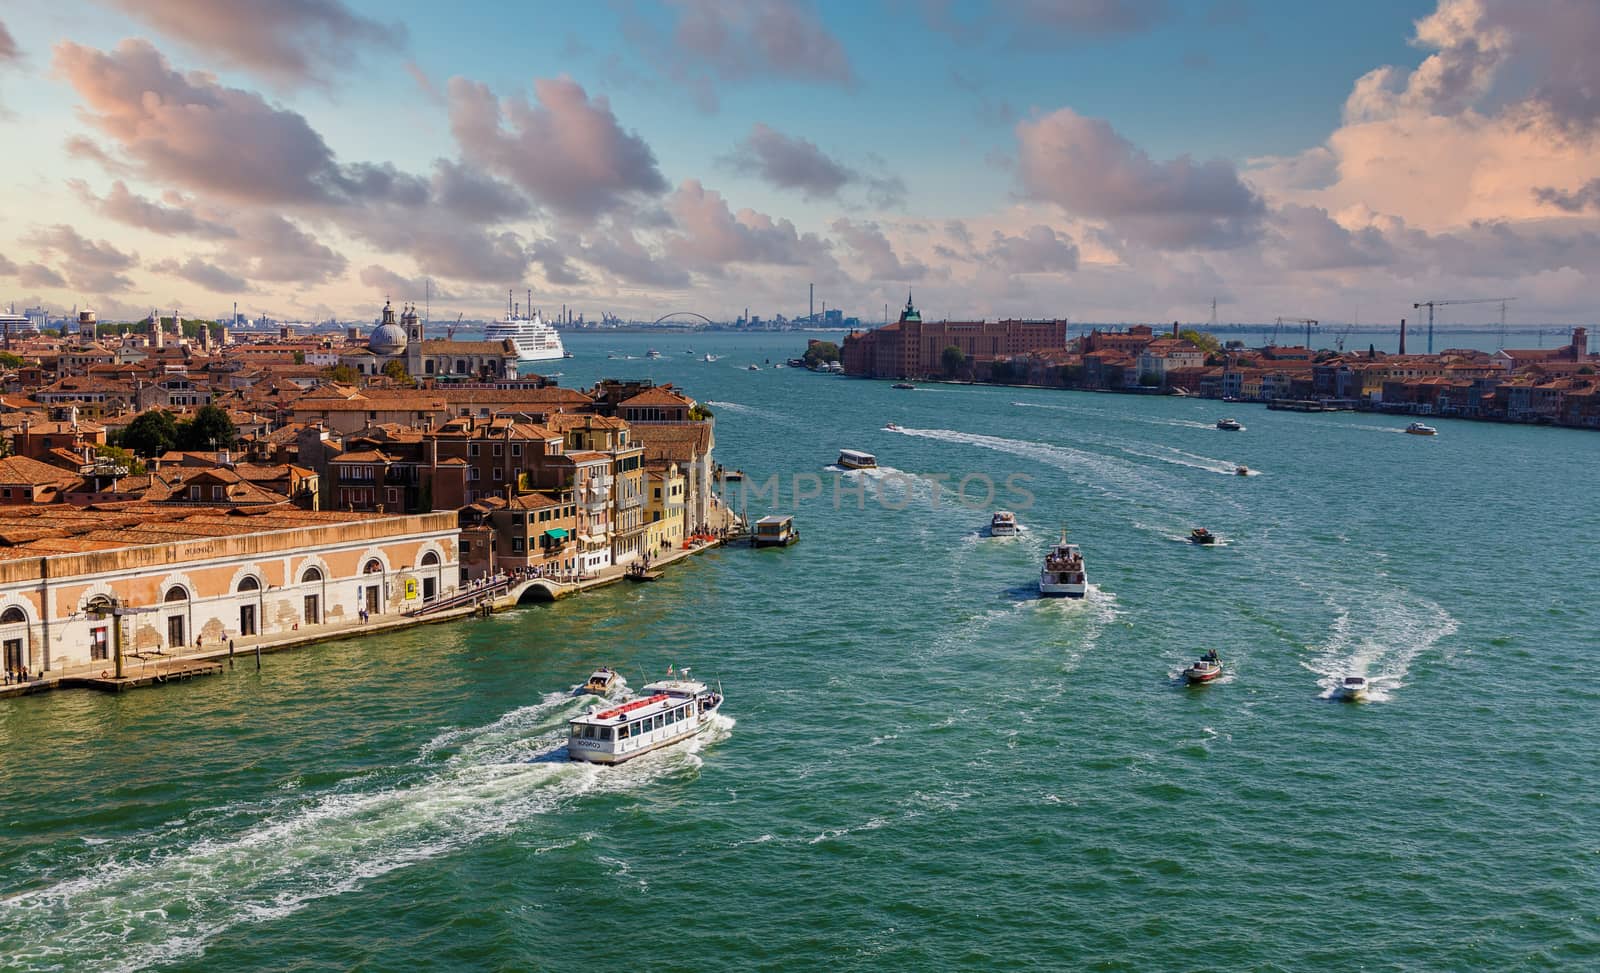 Ferries and Water Taxis in Venice Canal by dbvirago